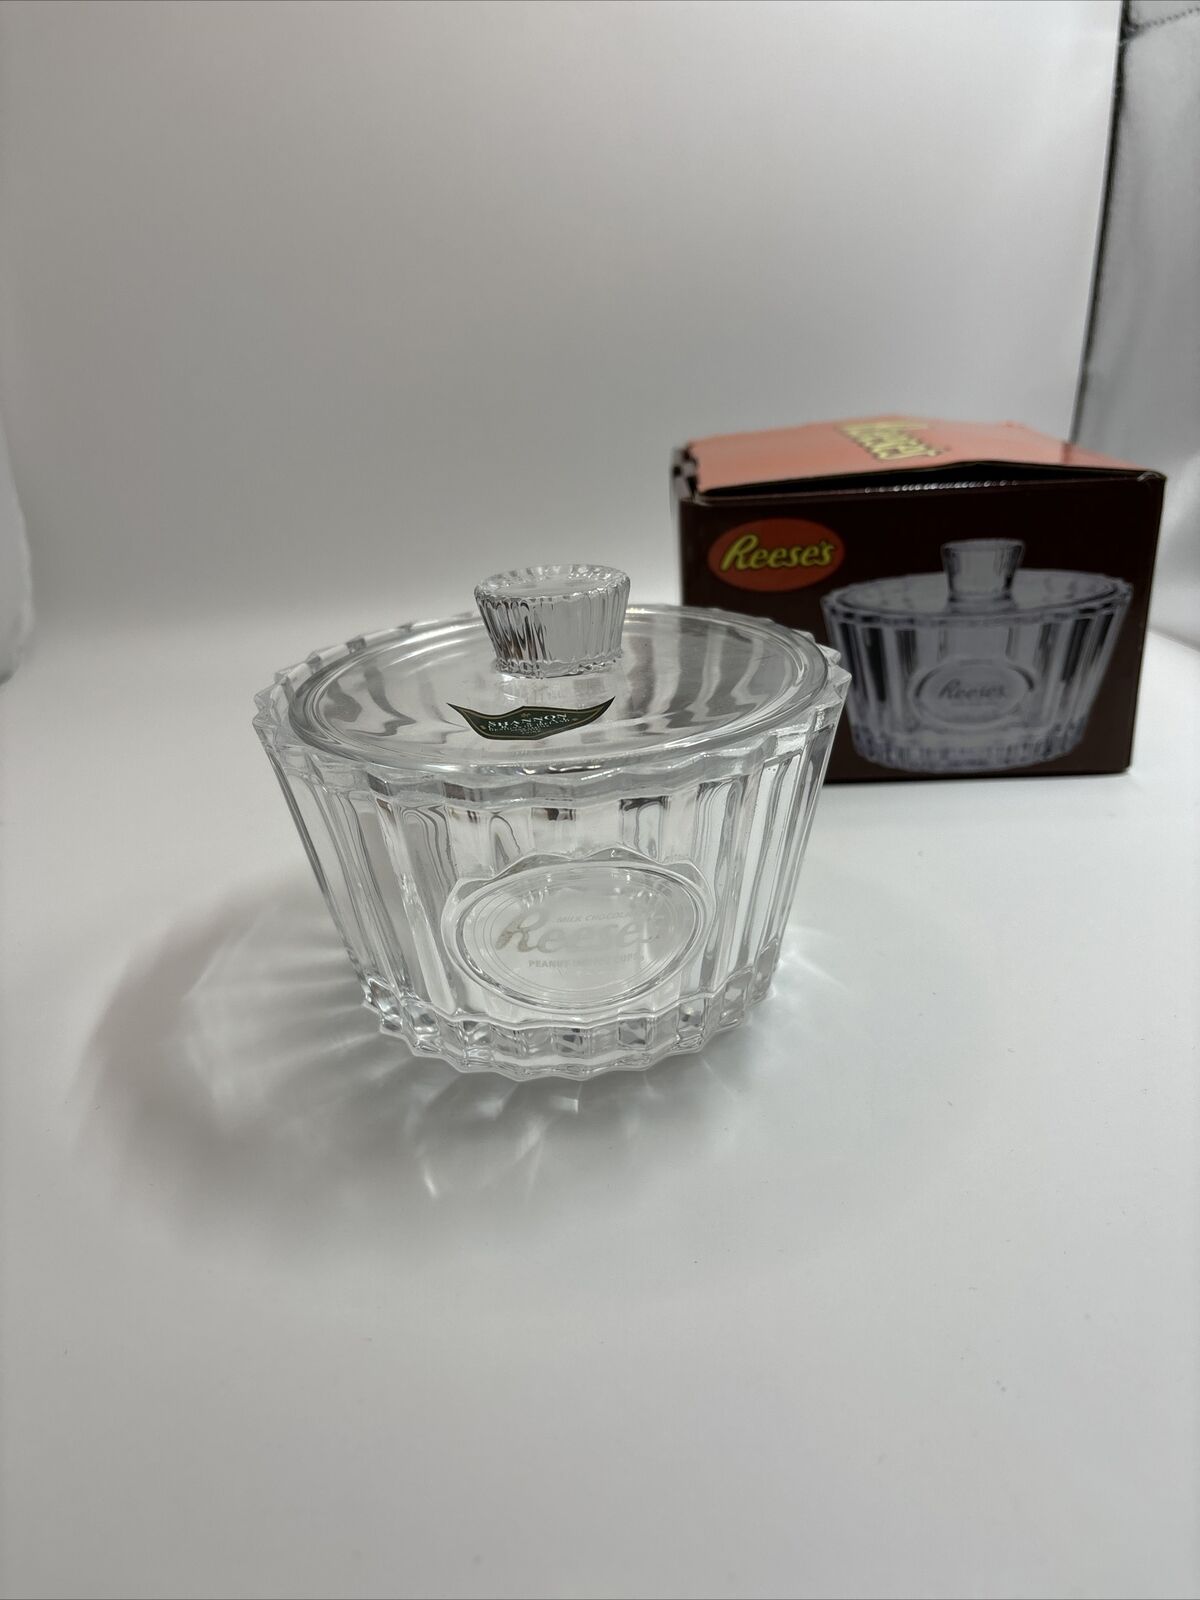 Reese\'s Crystal Candy Dish - Peanut Butter Cup Shaped Elegant Covered Glass Bowl